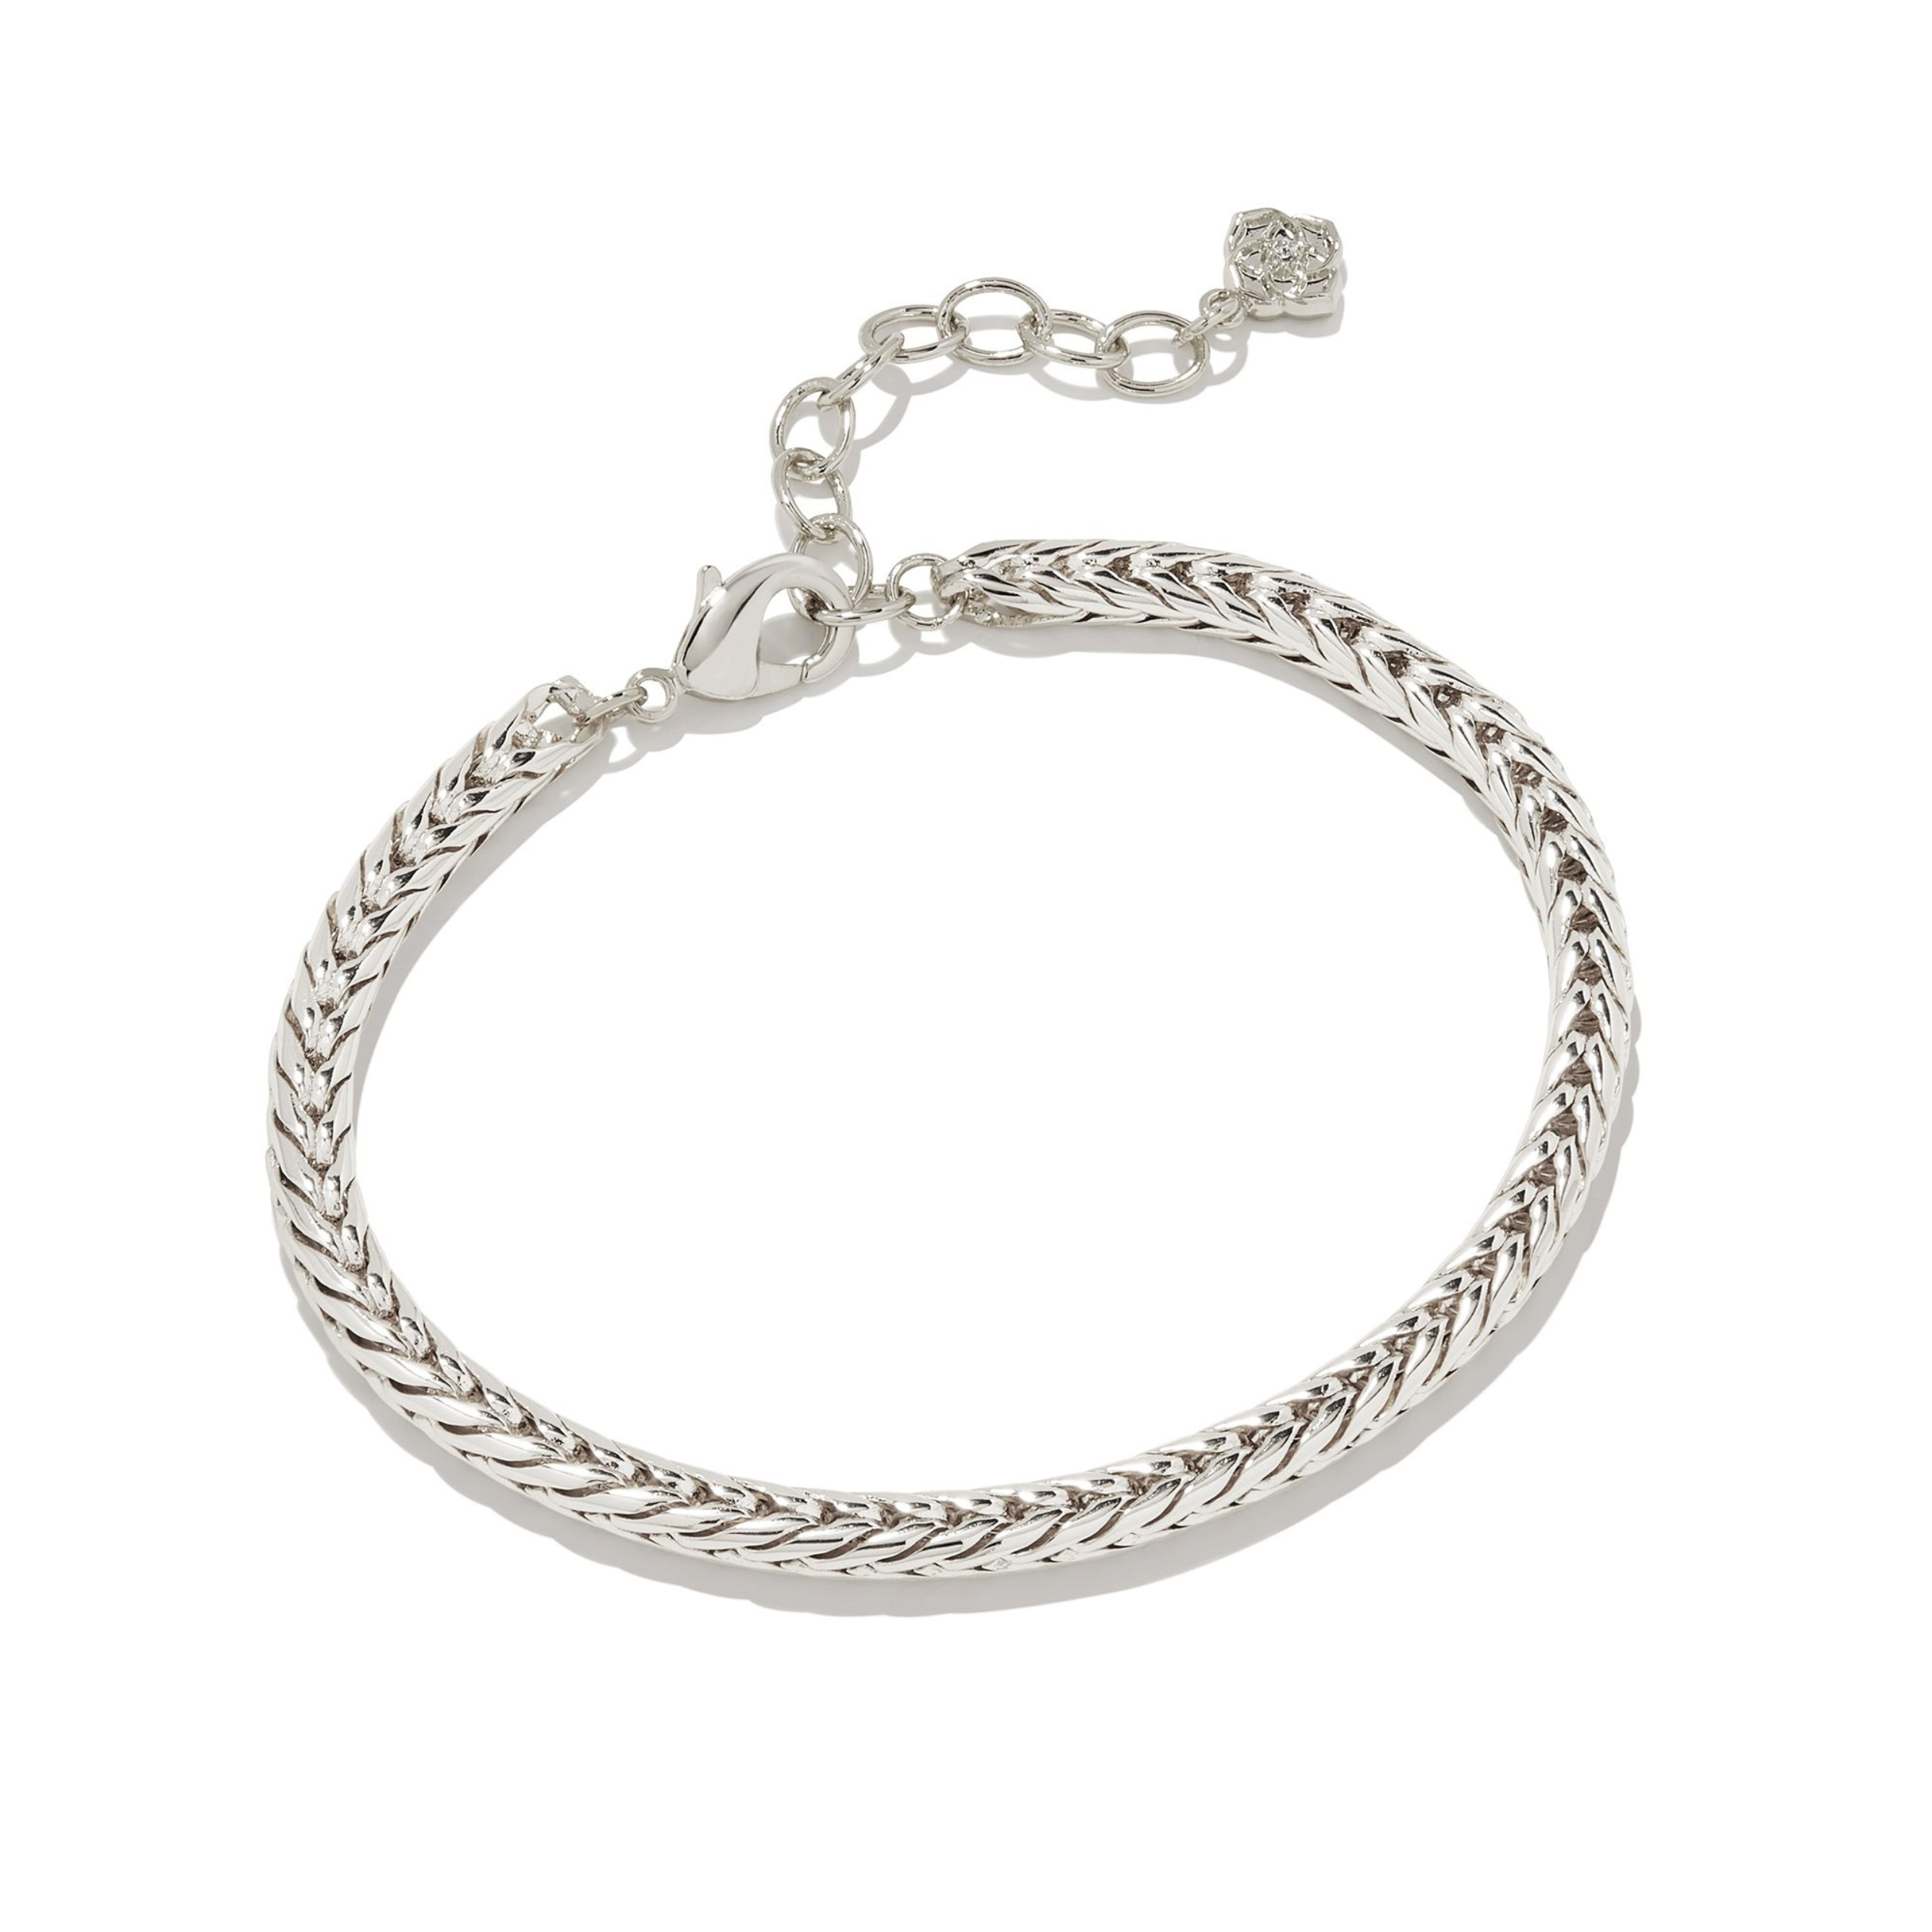 Silver chain bracelet pictured on a white background. 